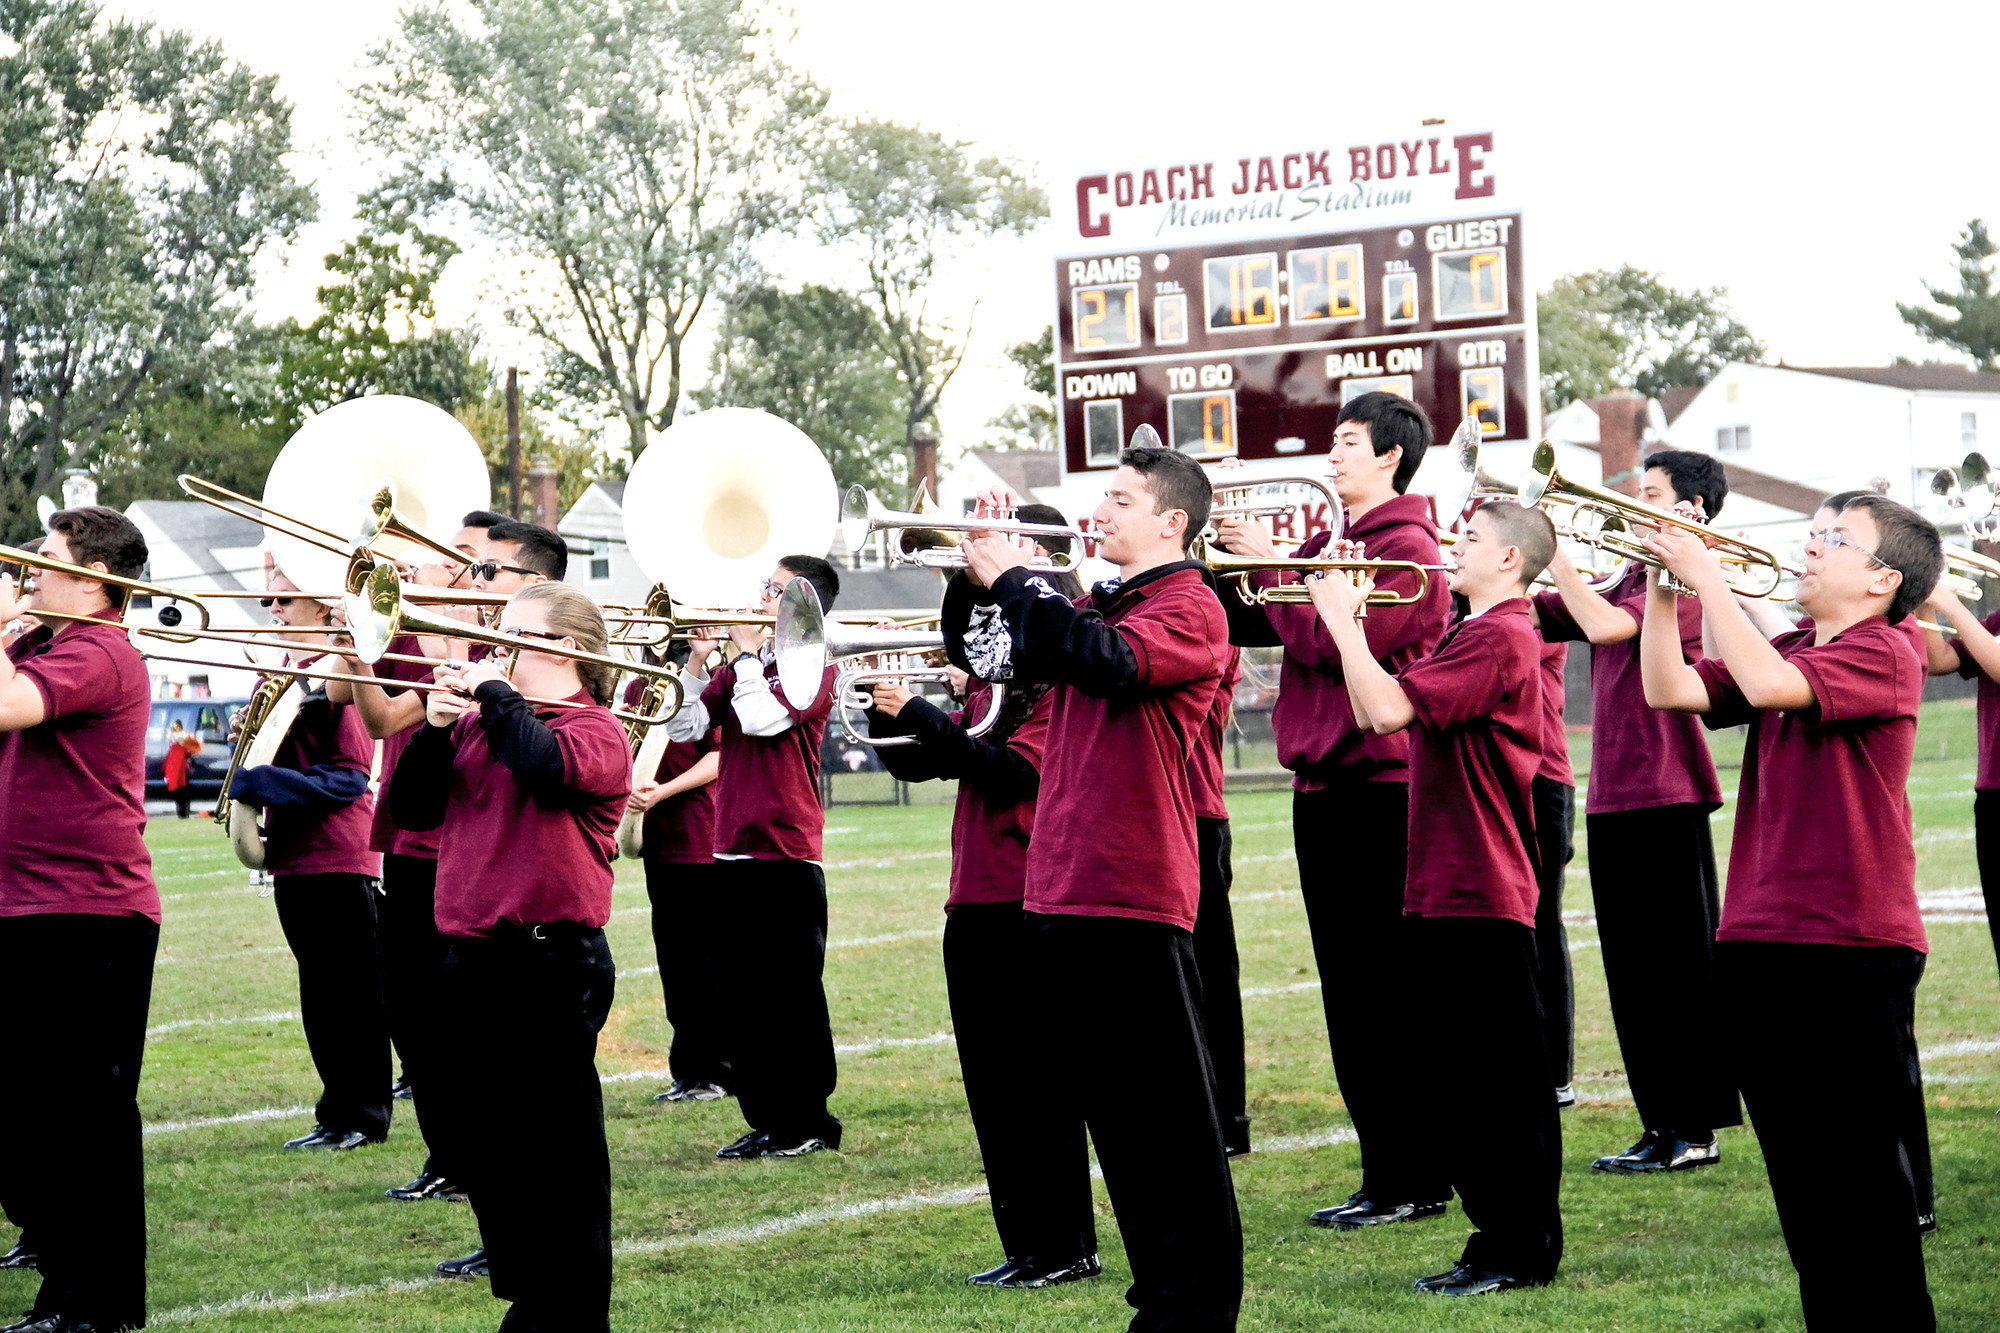 The marching band played at halftime, as the Rams were leading visiting Island Trees, 21-0.